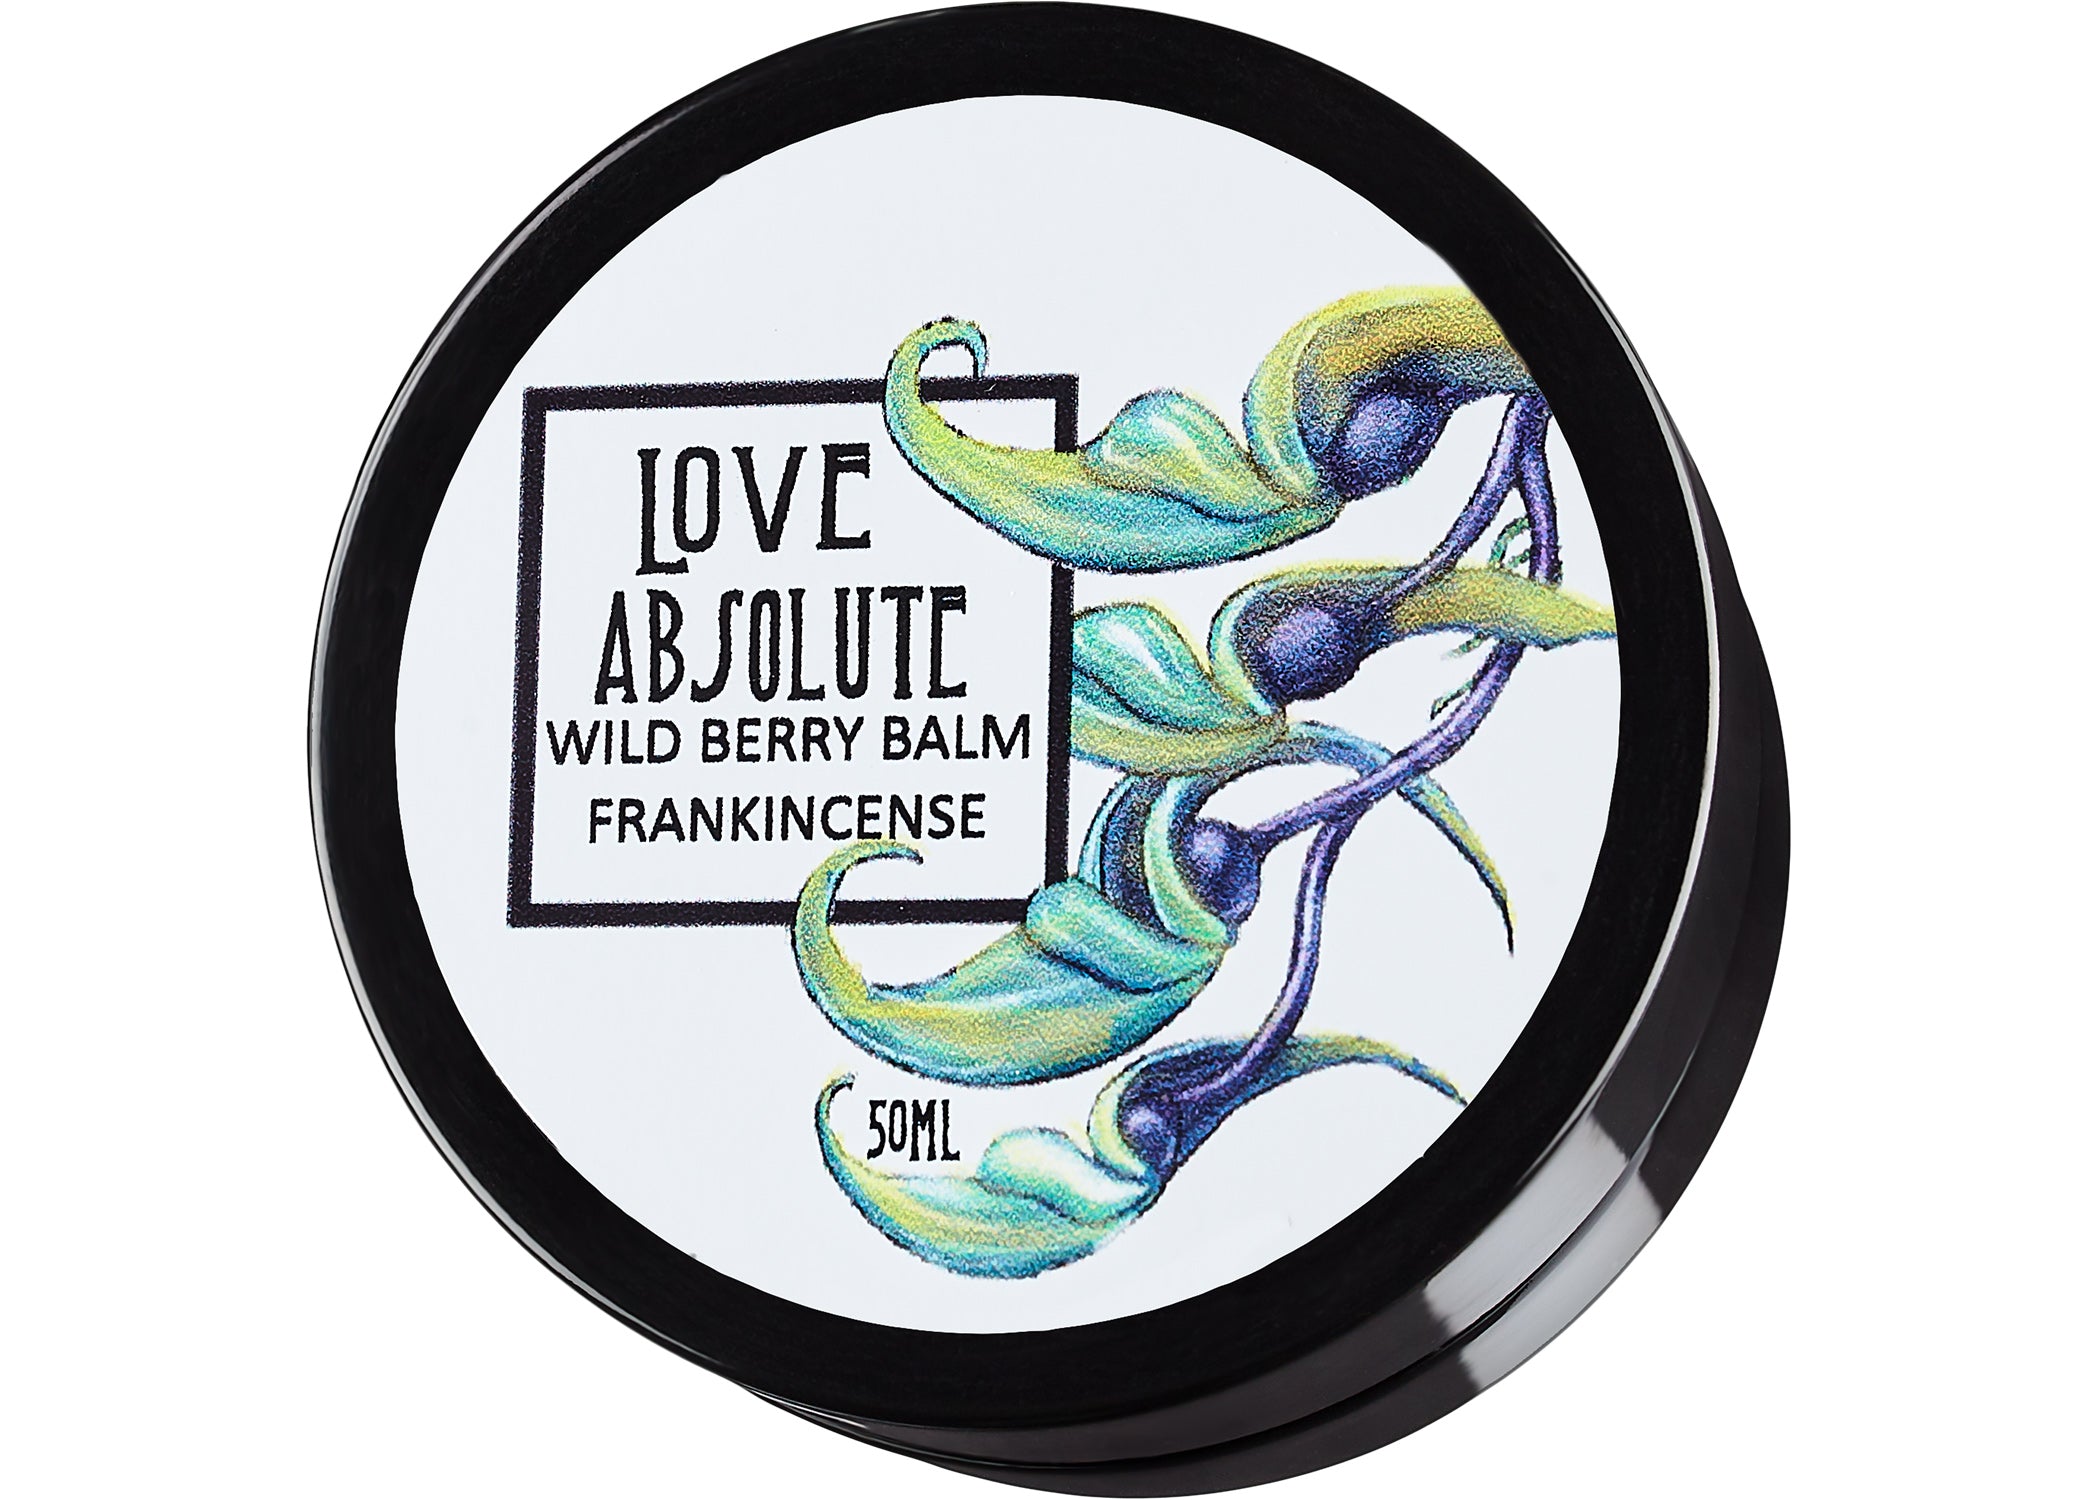 Wild Berry Balm With Frankincense - Love Absolute